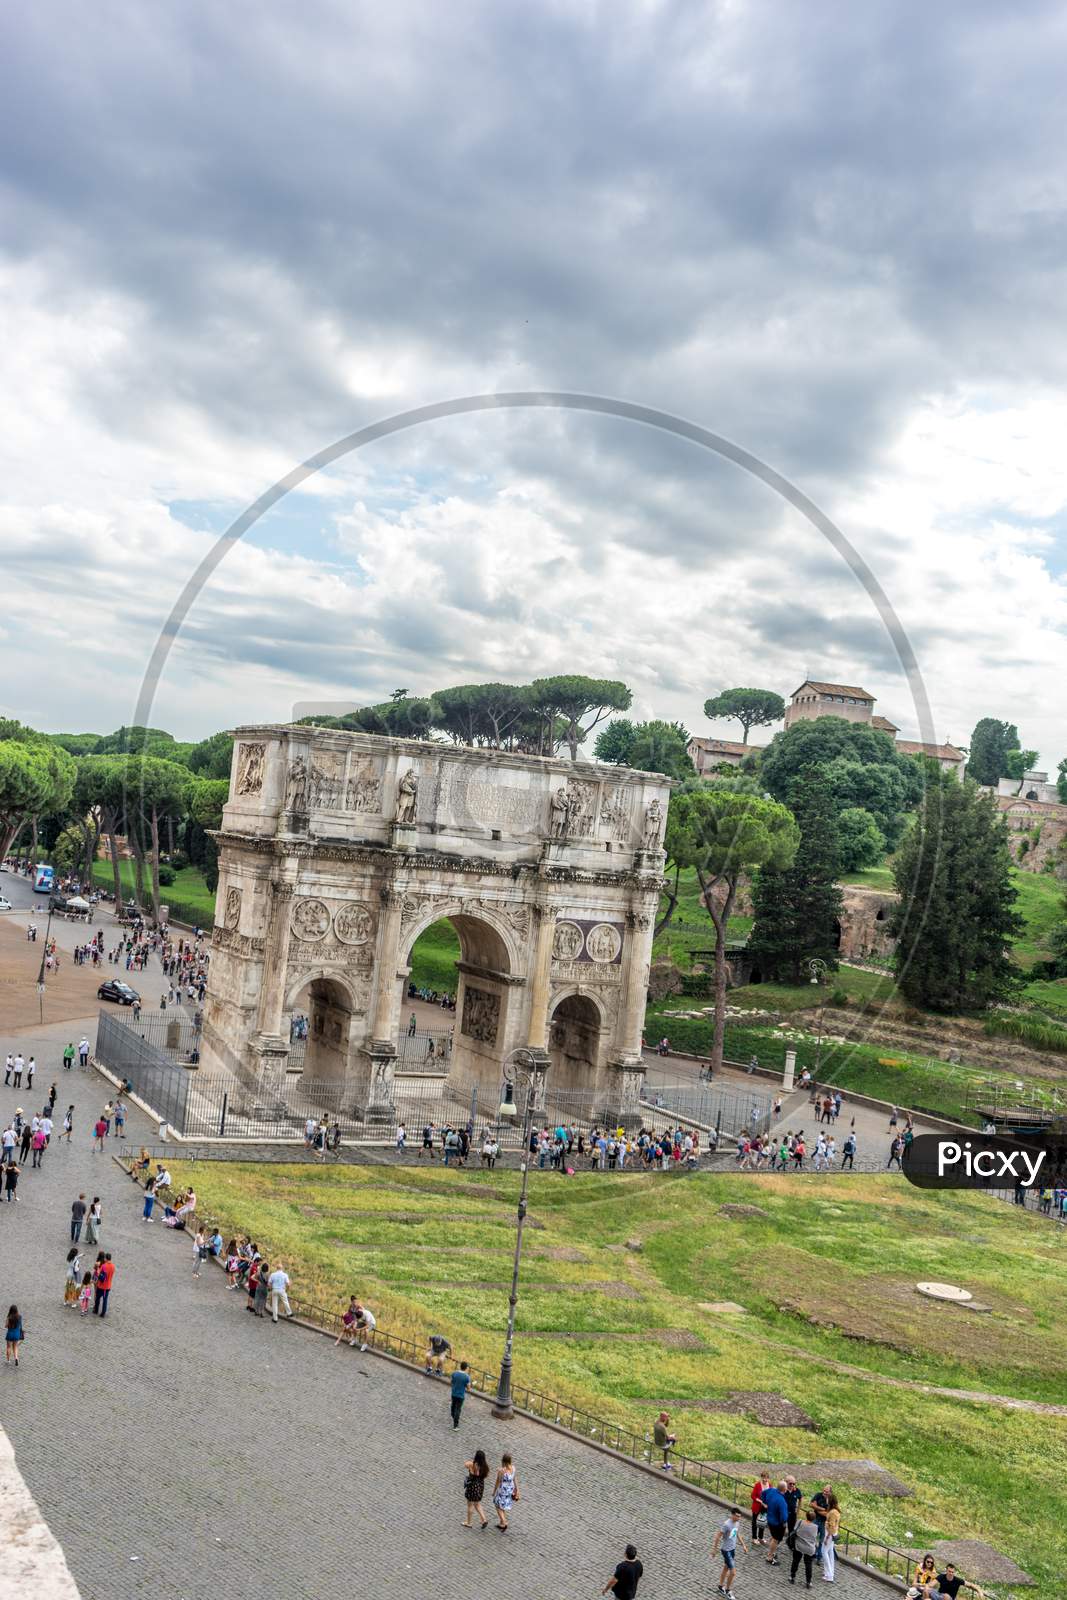 Rome, Italy - 23 June 2018: The Ancient Ruins Of The Arch Of Constantine At Rome Viewed From The Colosseum. Famous World Landmark. Scenic Urban Landscape.